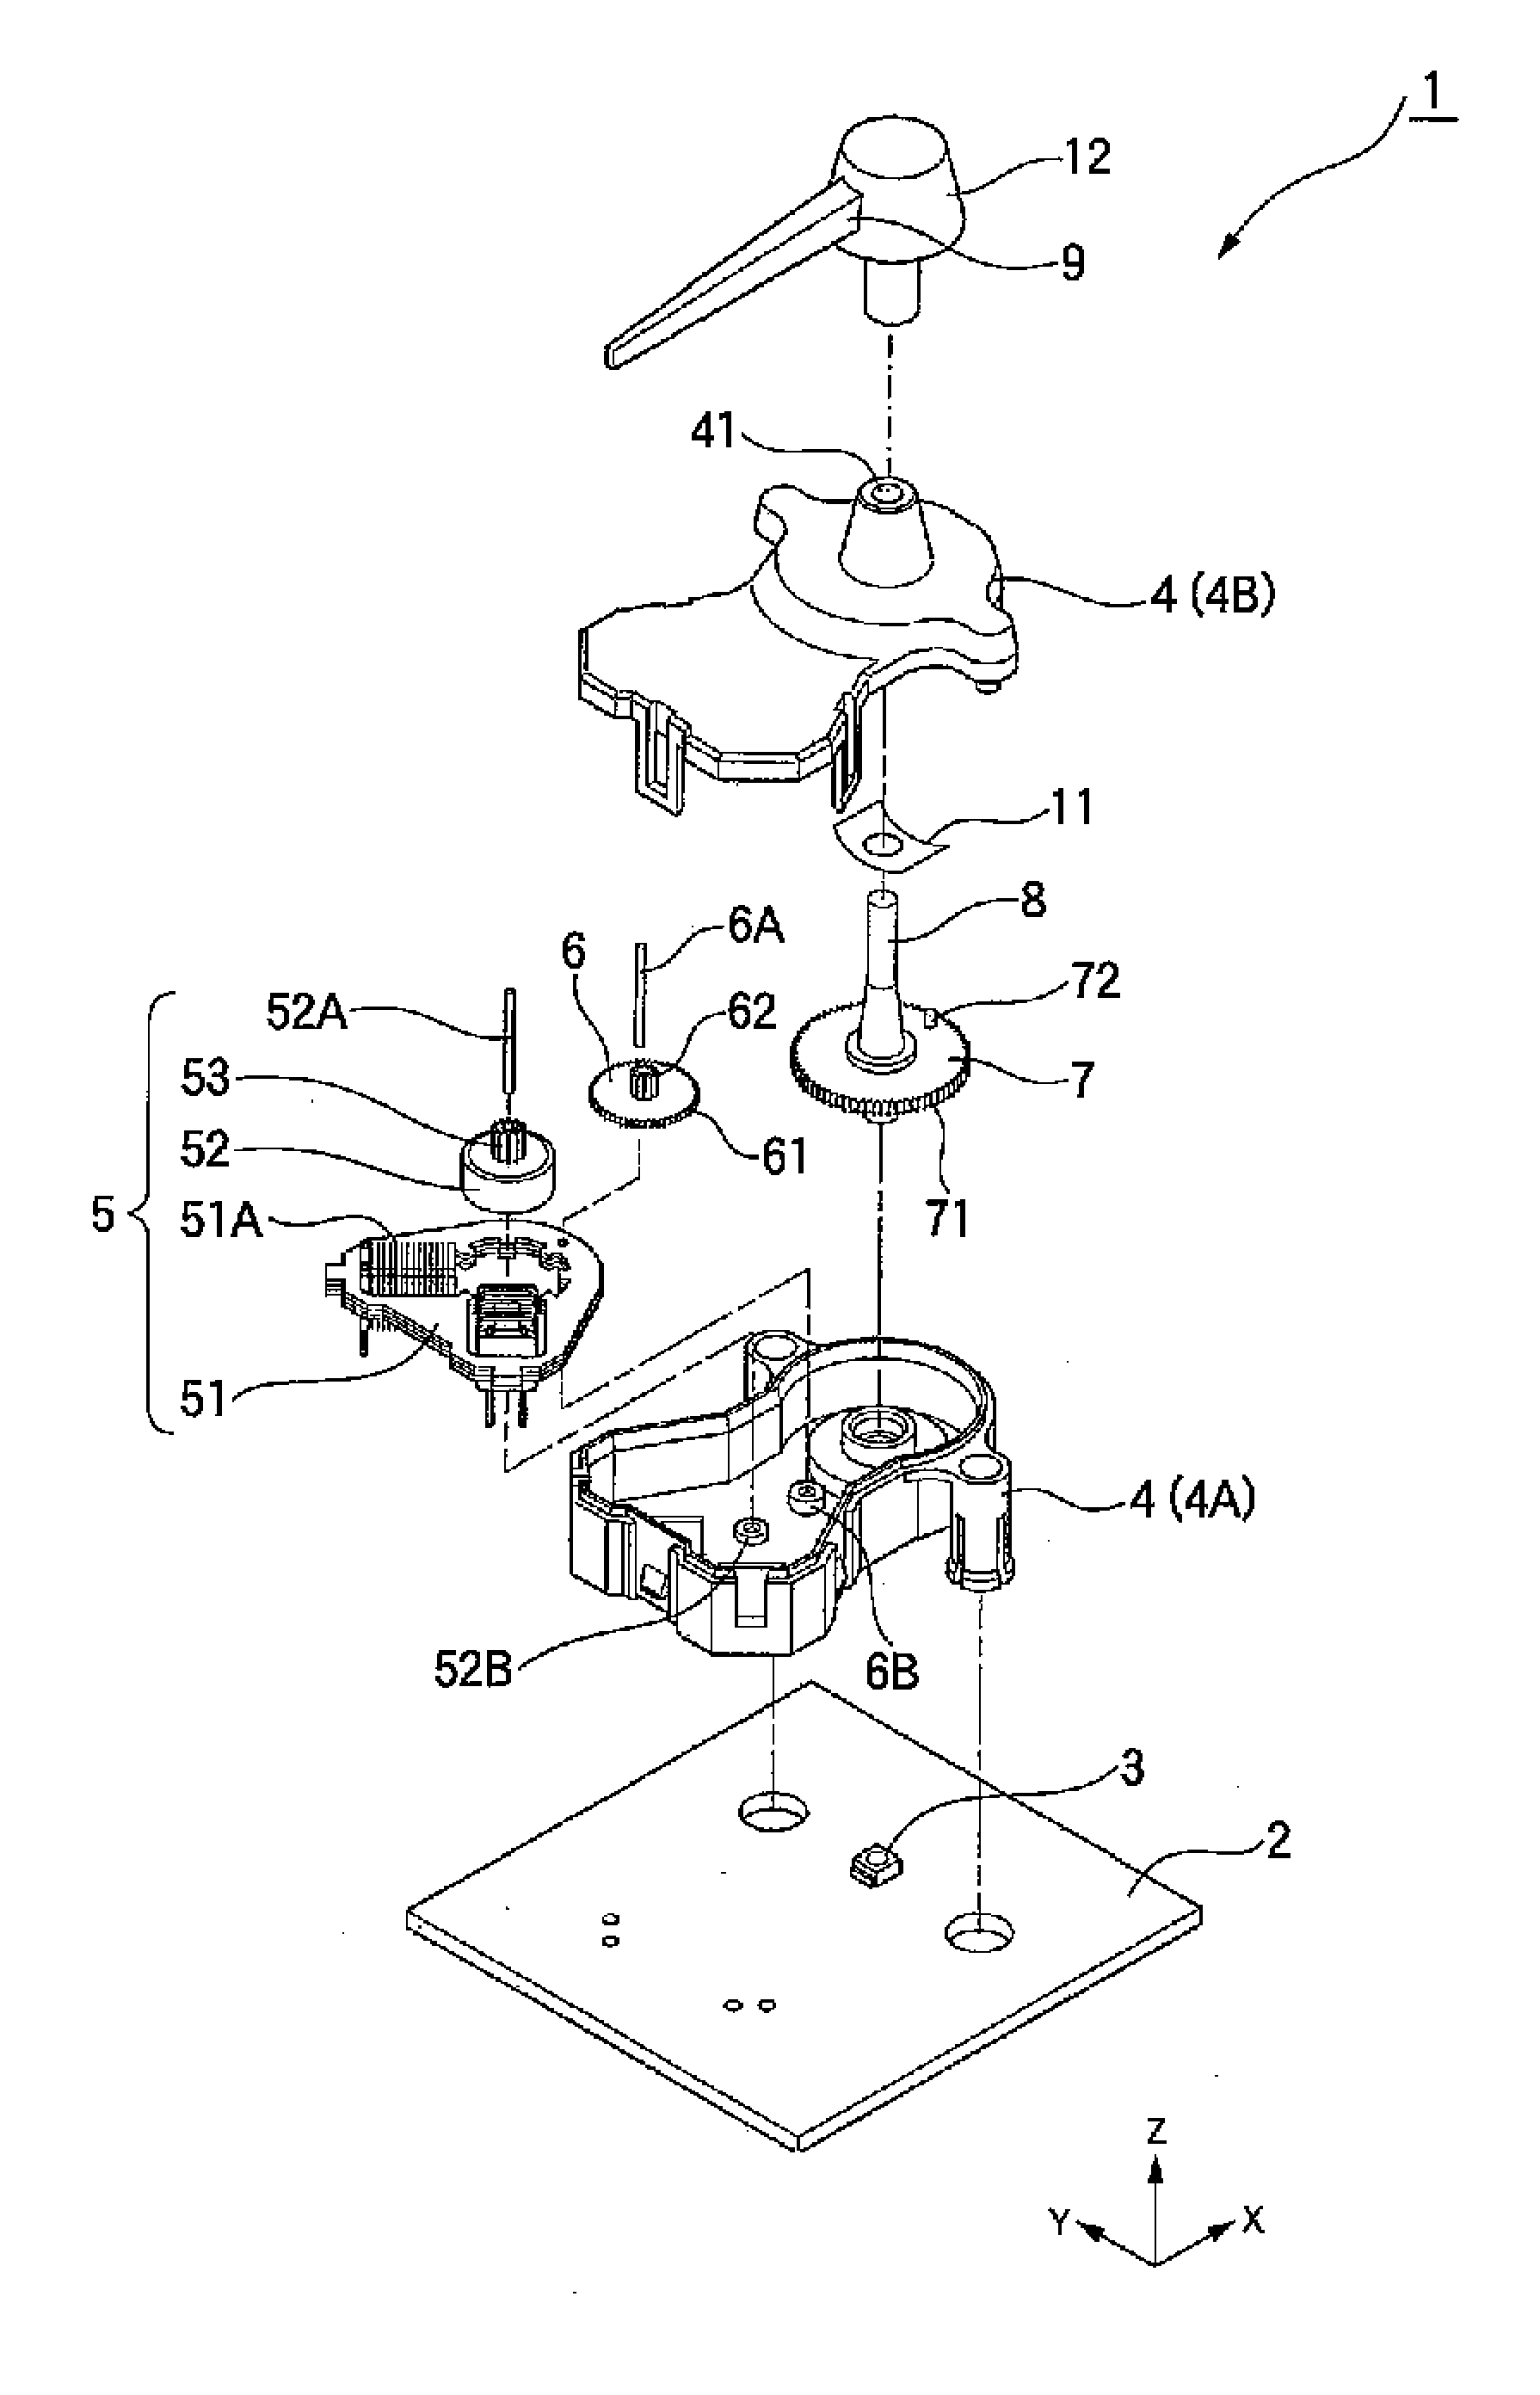 Needle attaching structure of rotating shaft and meter device